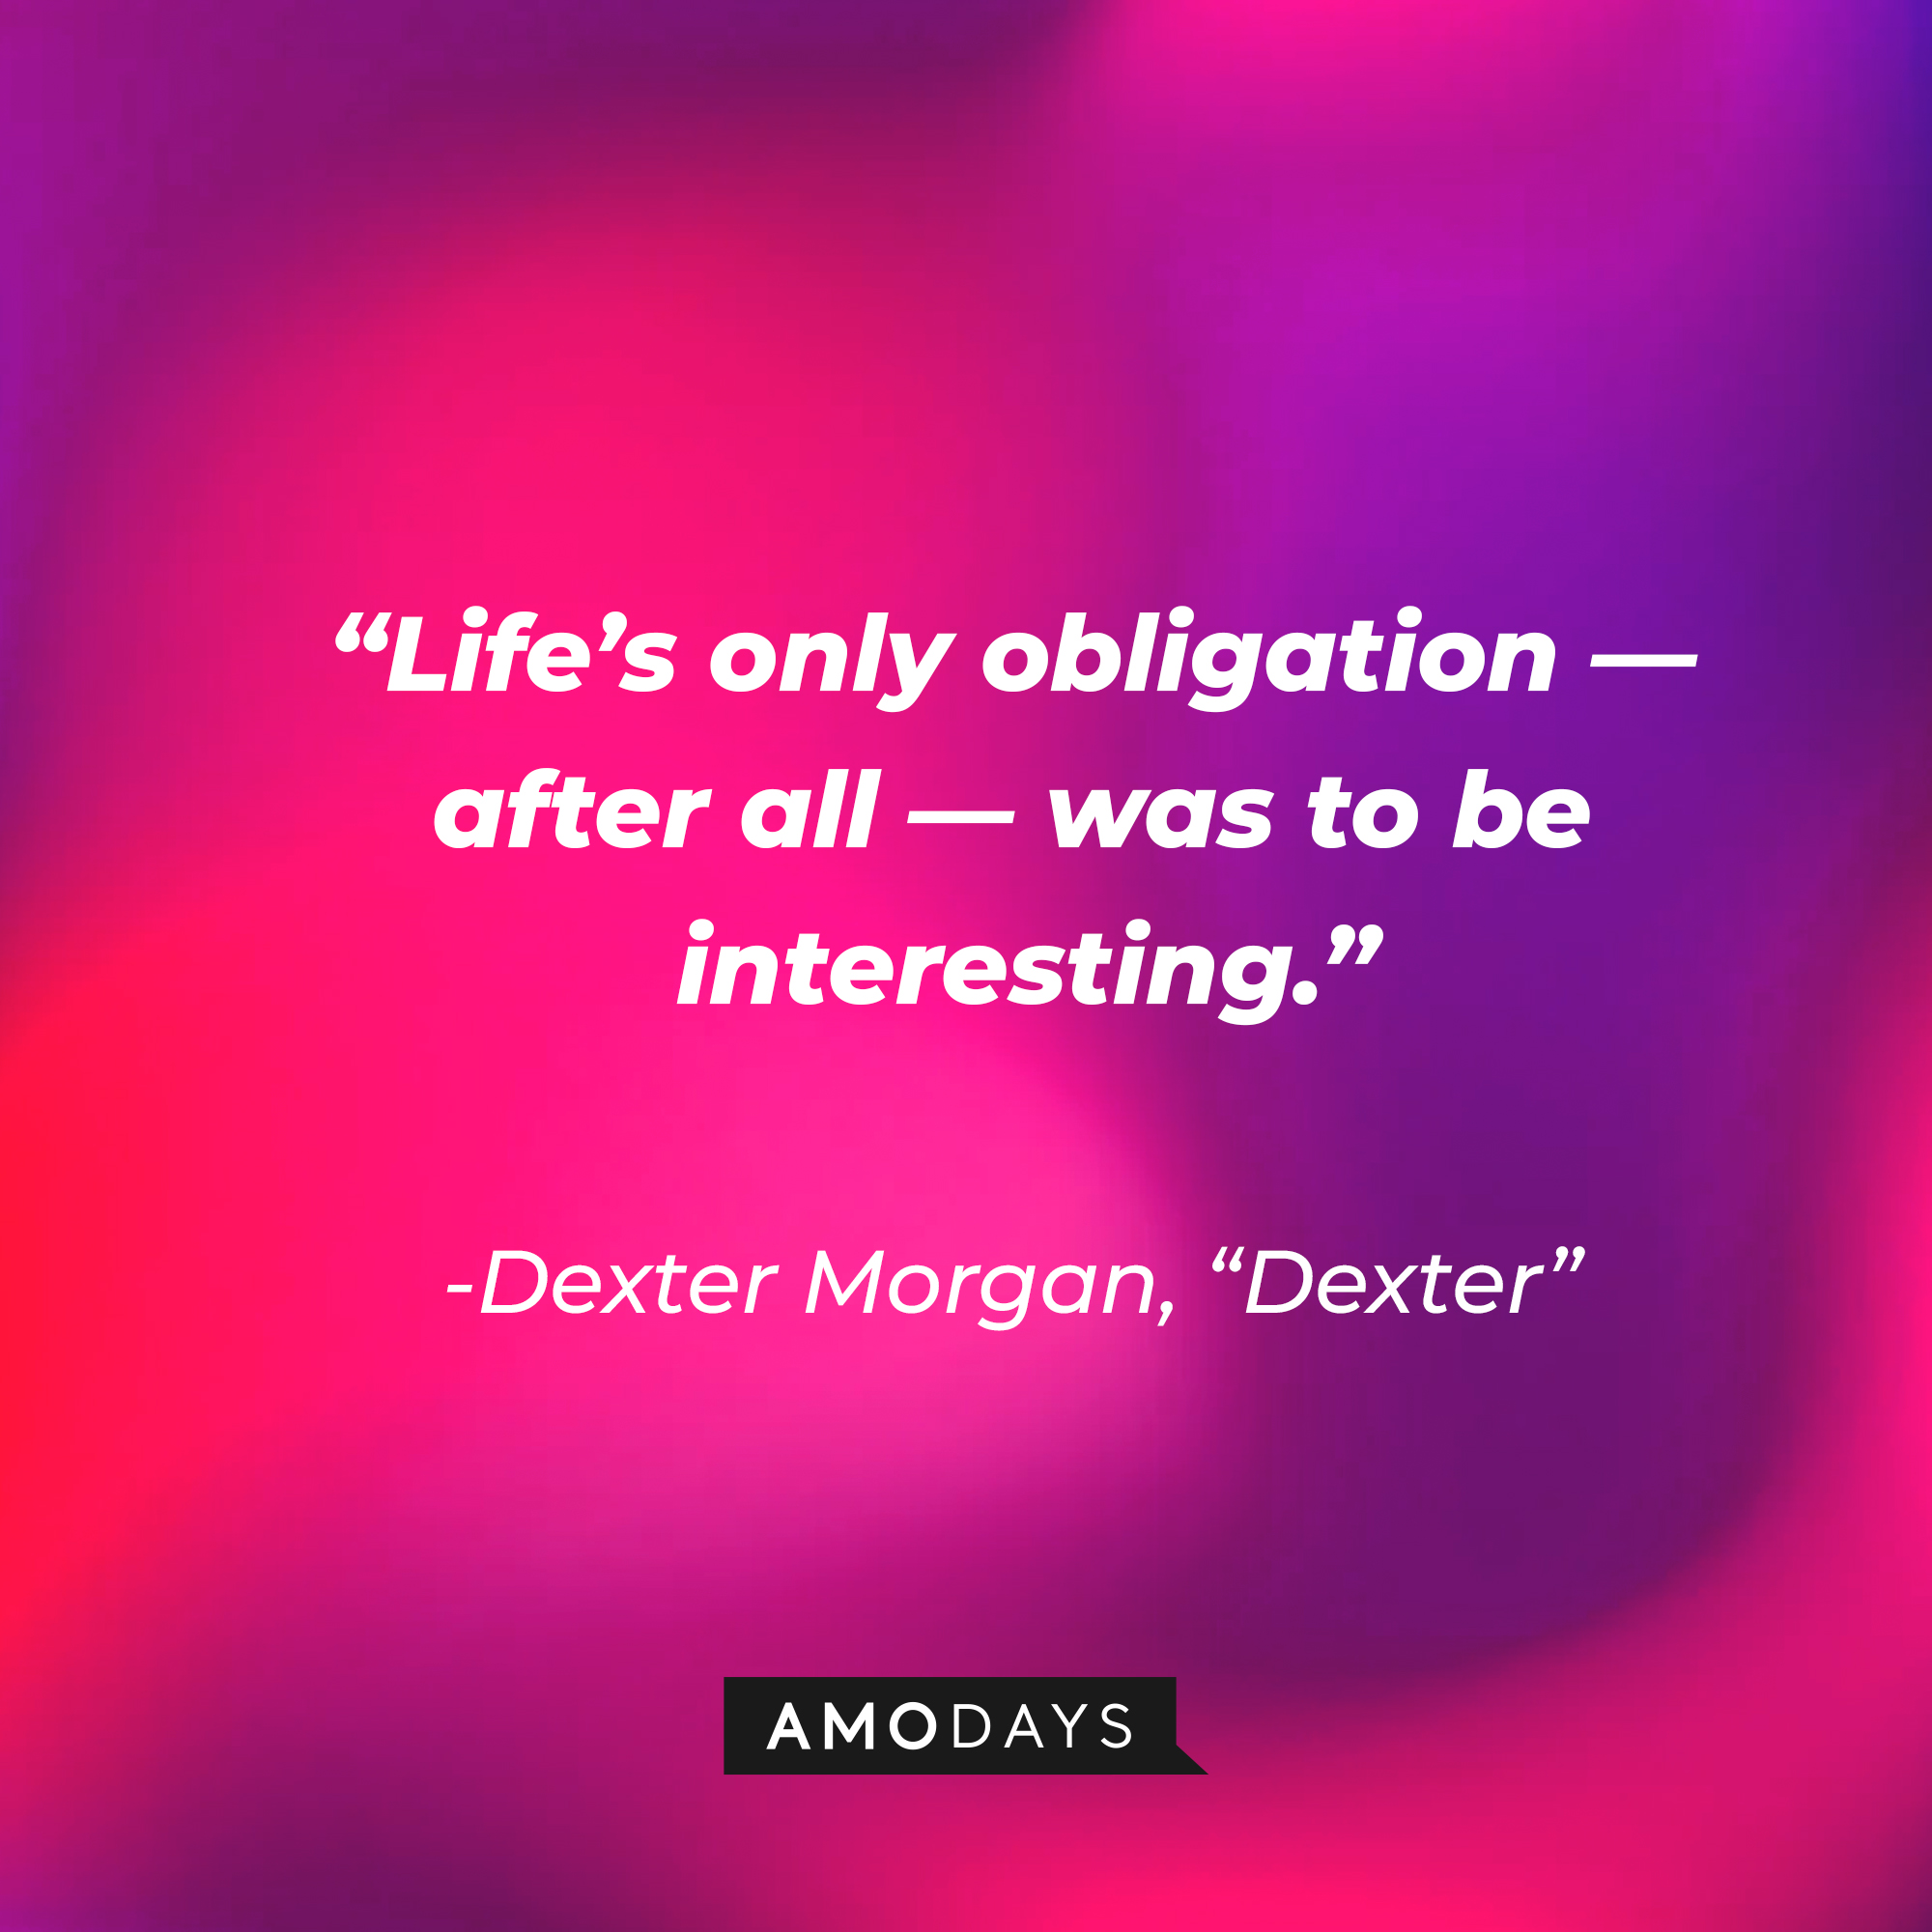 Dexter Morgan's quote from "Dexter:" "Life’s only obligation — after all — was to be interesting.” | Source: AmoDays